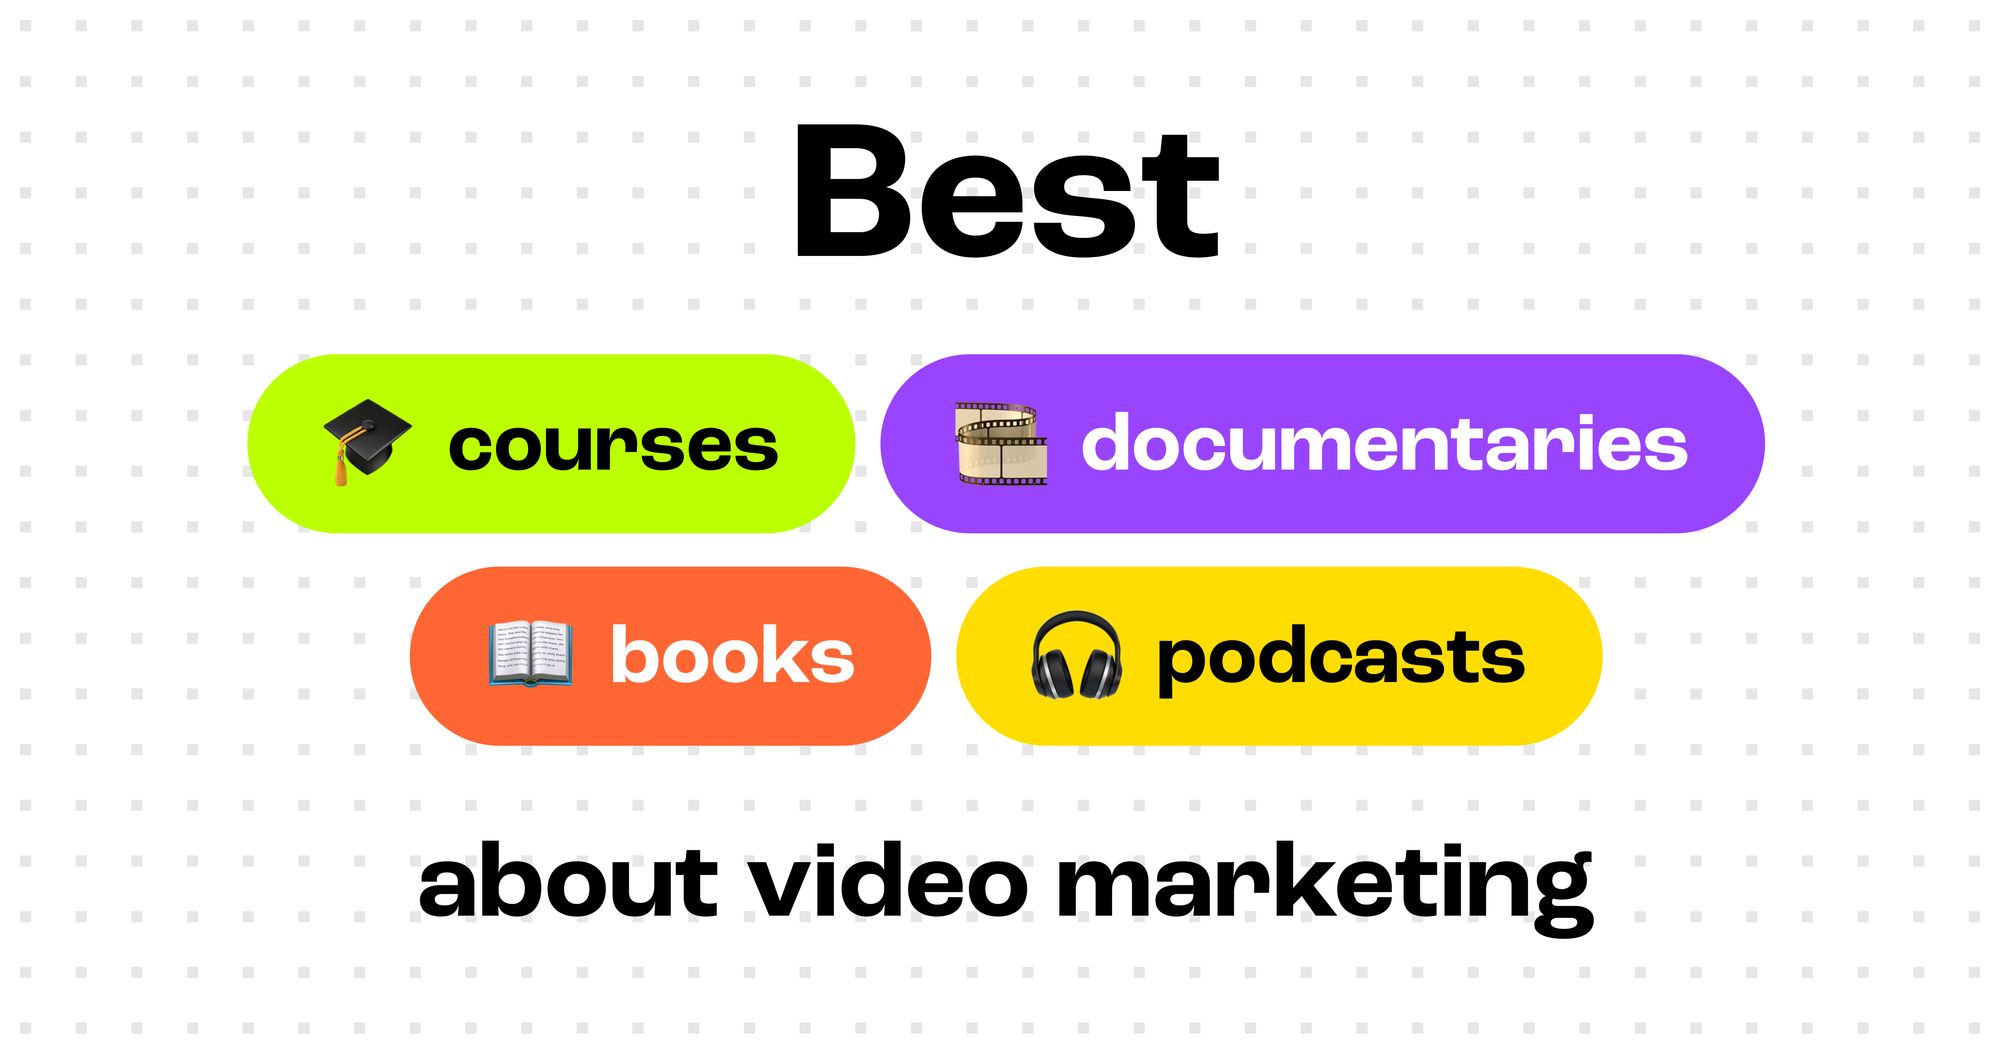 The best resources to learn video marketing 